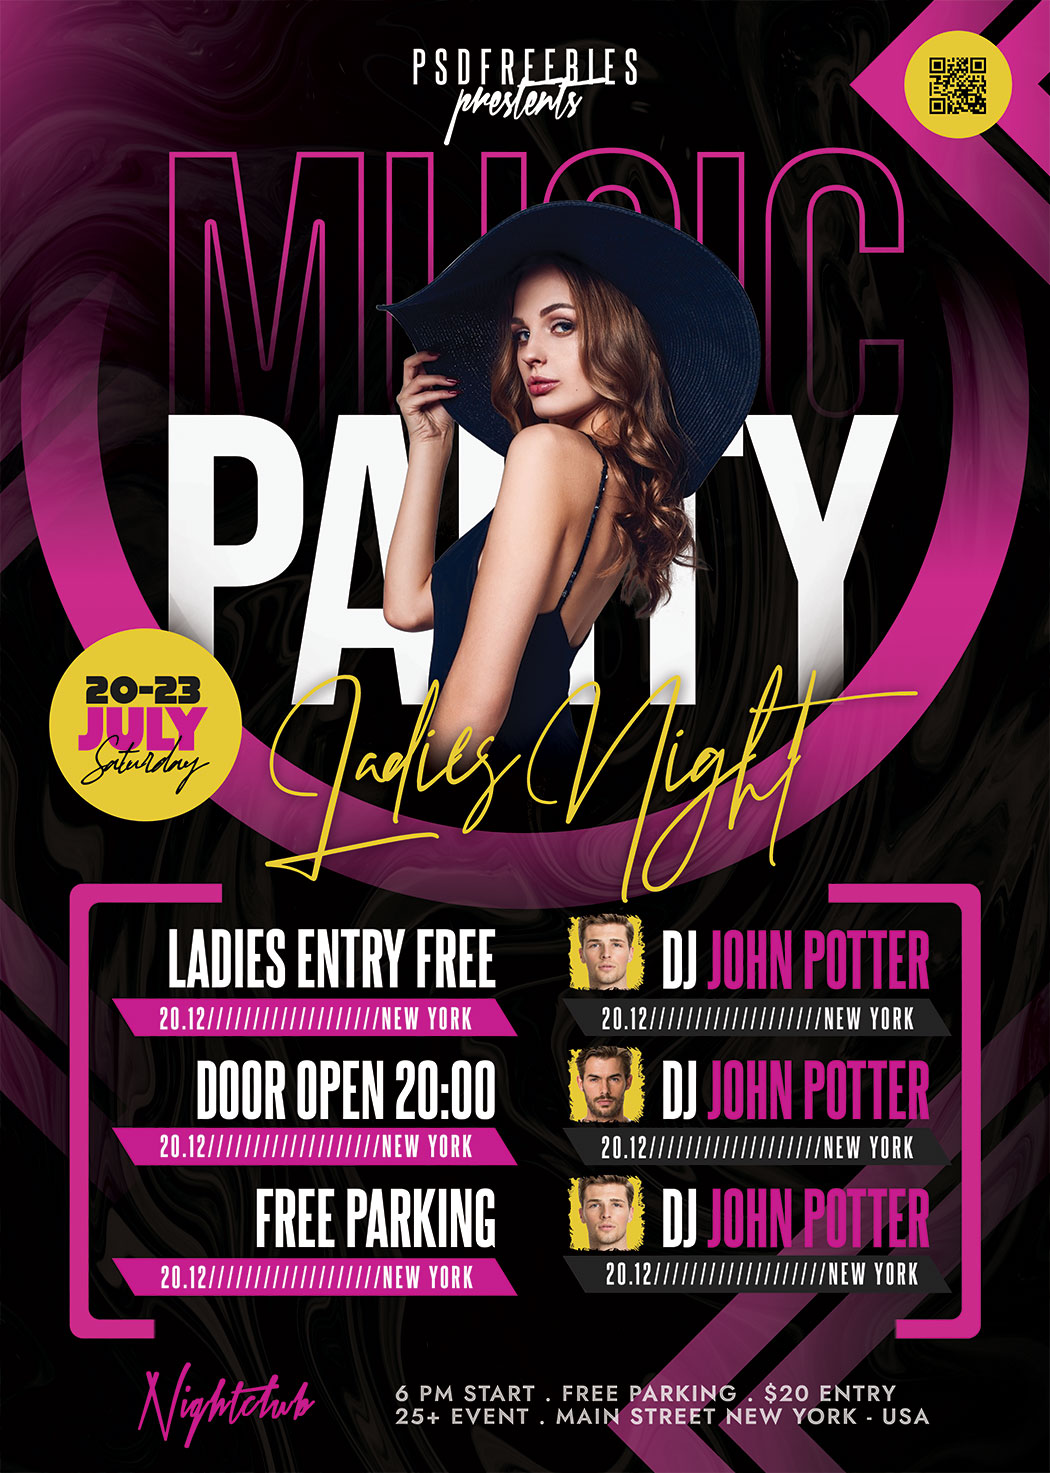 Awesome Club Party Flyer PSD Template Preview PSDFreebies com